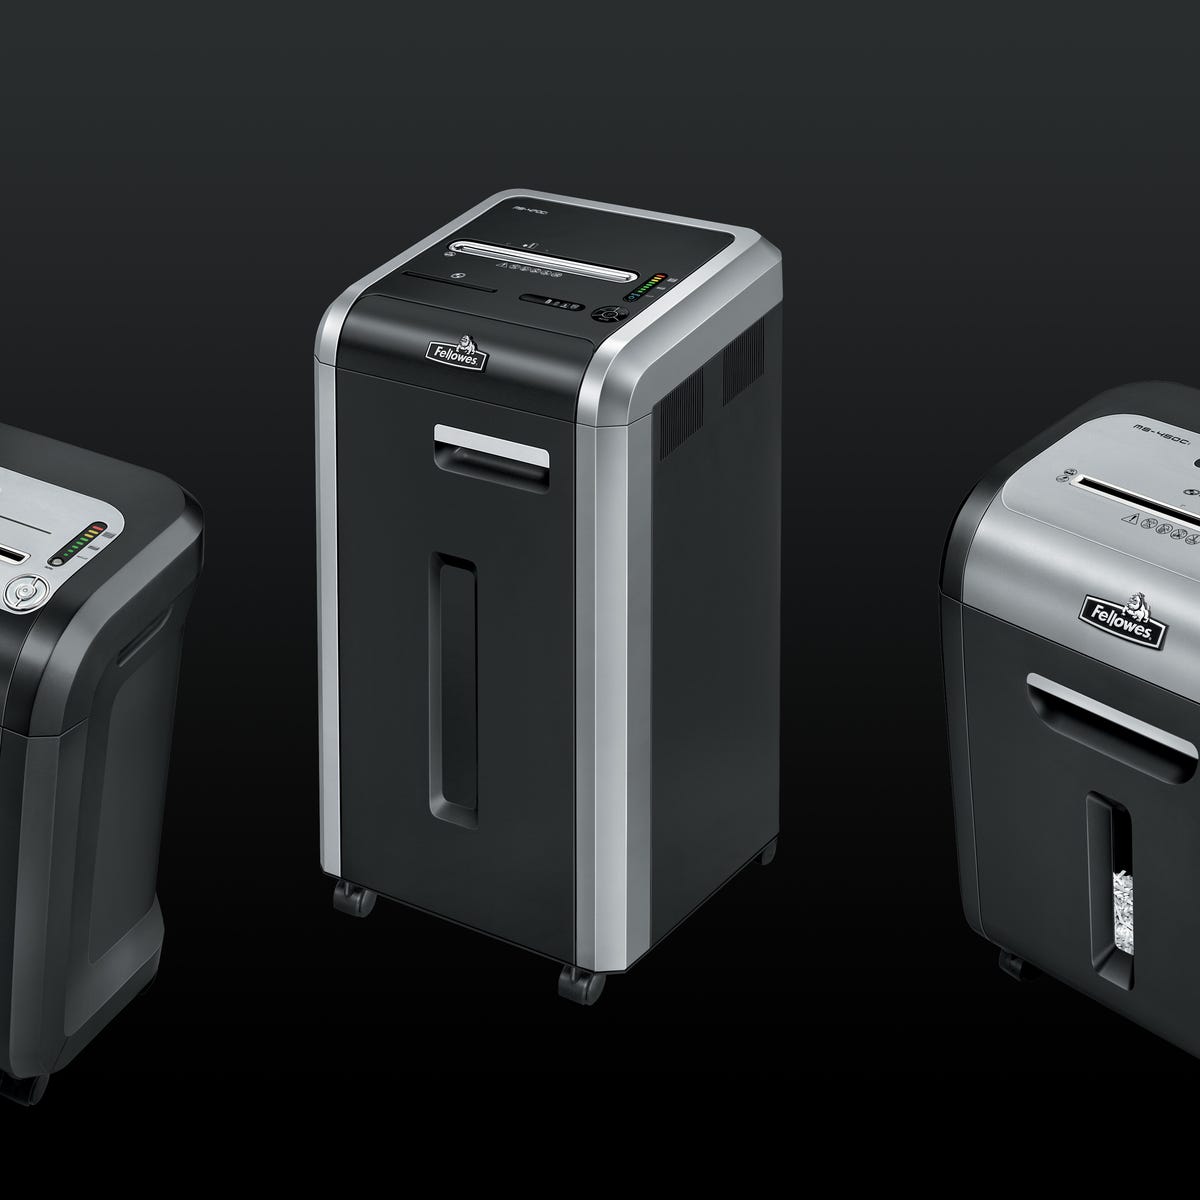 Paper shredders of different sizes